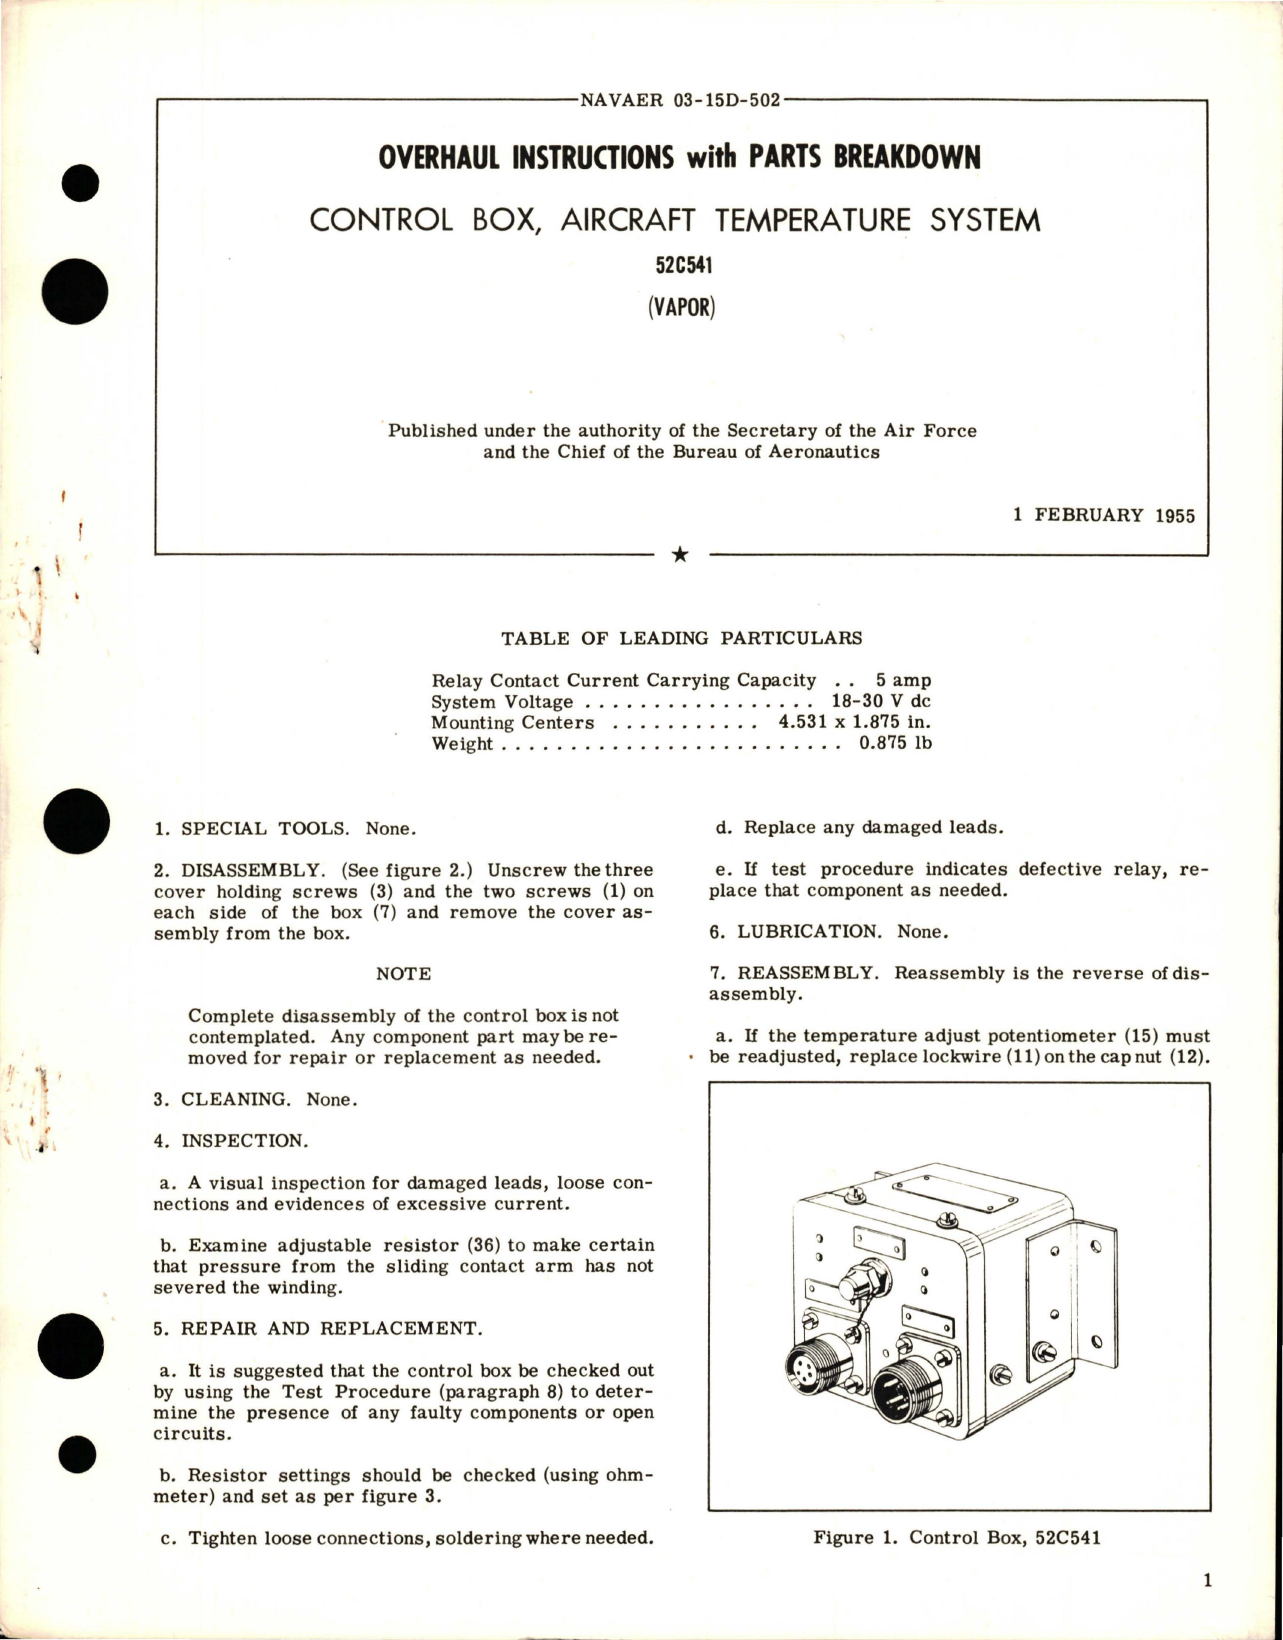 Sample page 1 from AirCorps Library document: Overhaul Instructions with Parts for Aircraft Temperature System Control Box - 52C541